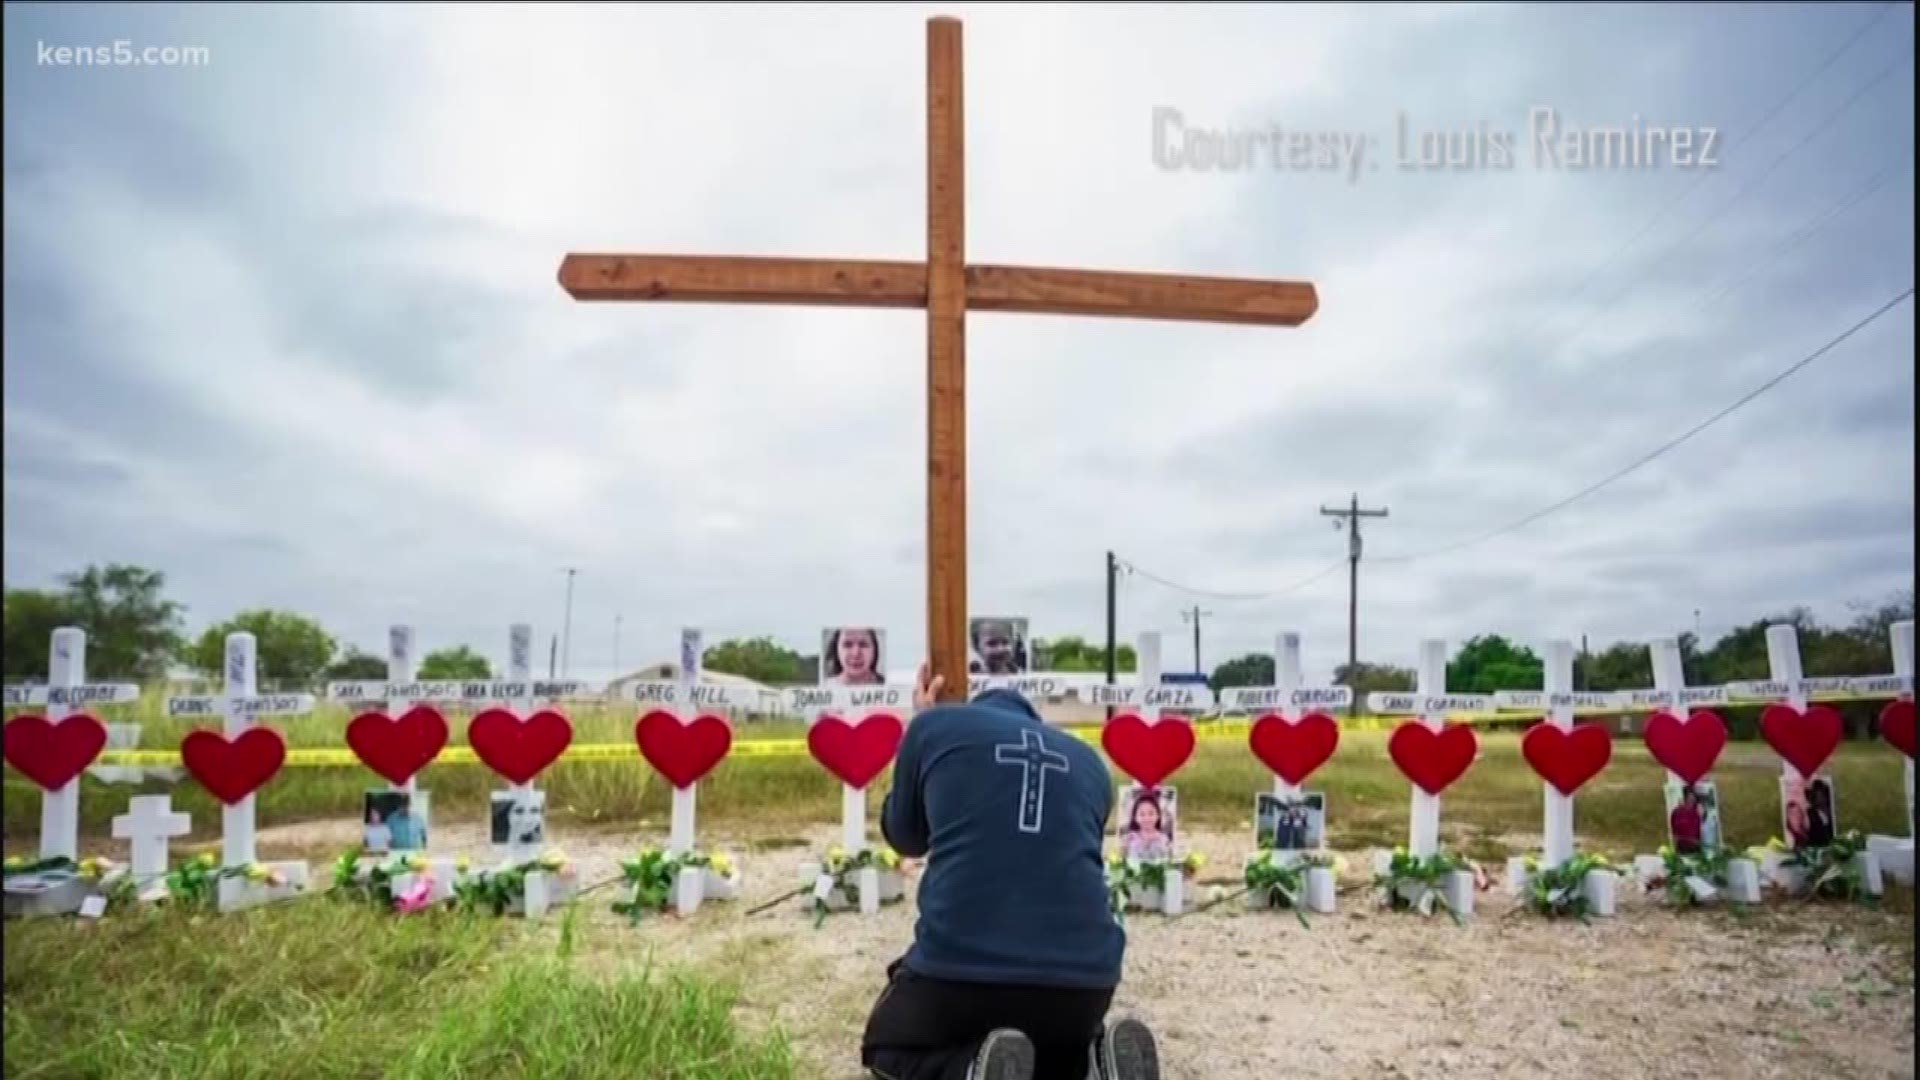 Lupe Navejas teared up as she remembered her brother and sister-in-law, both killed in the massacre at Sutherland Springs one year ago